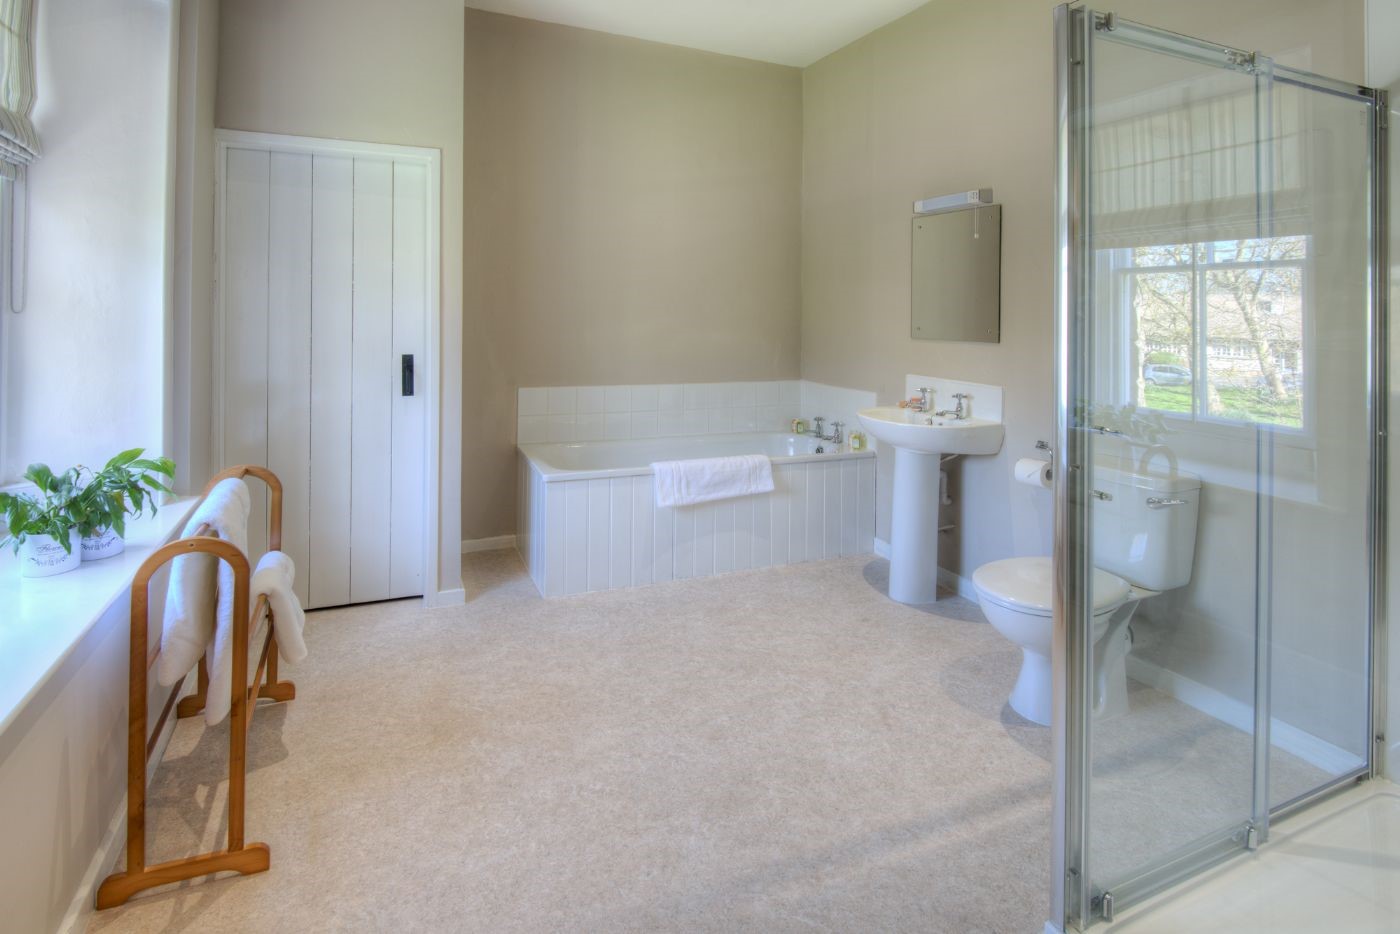 Grove House - bedroom one en suite bathroom with bath, walk-in shower, WC and basin